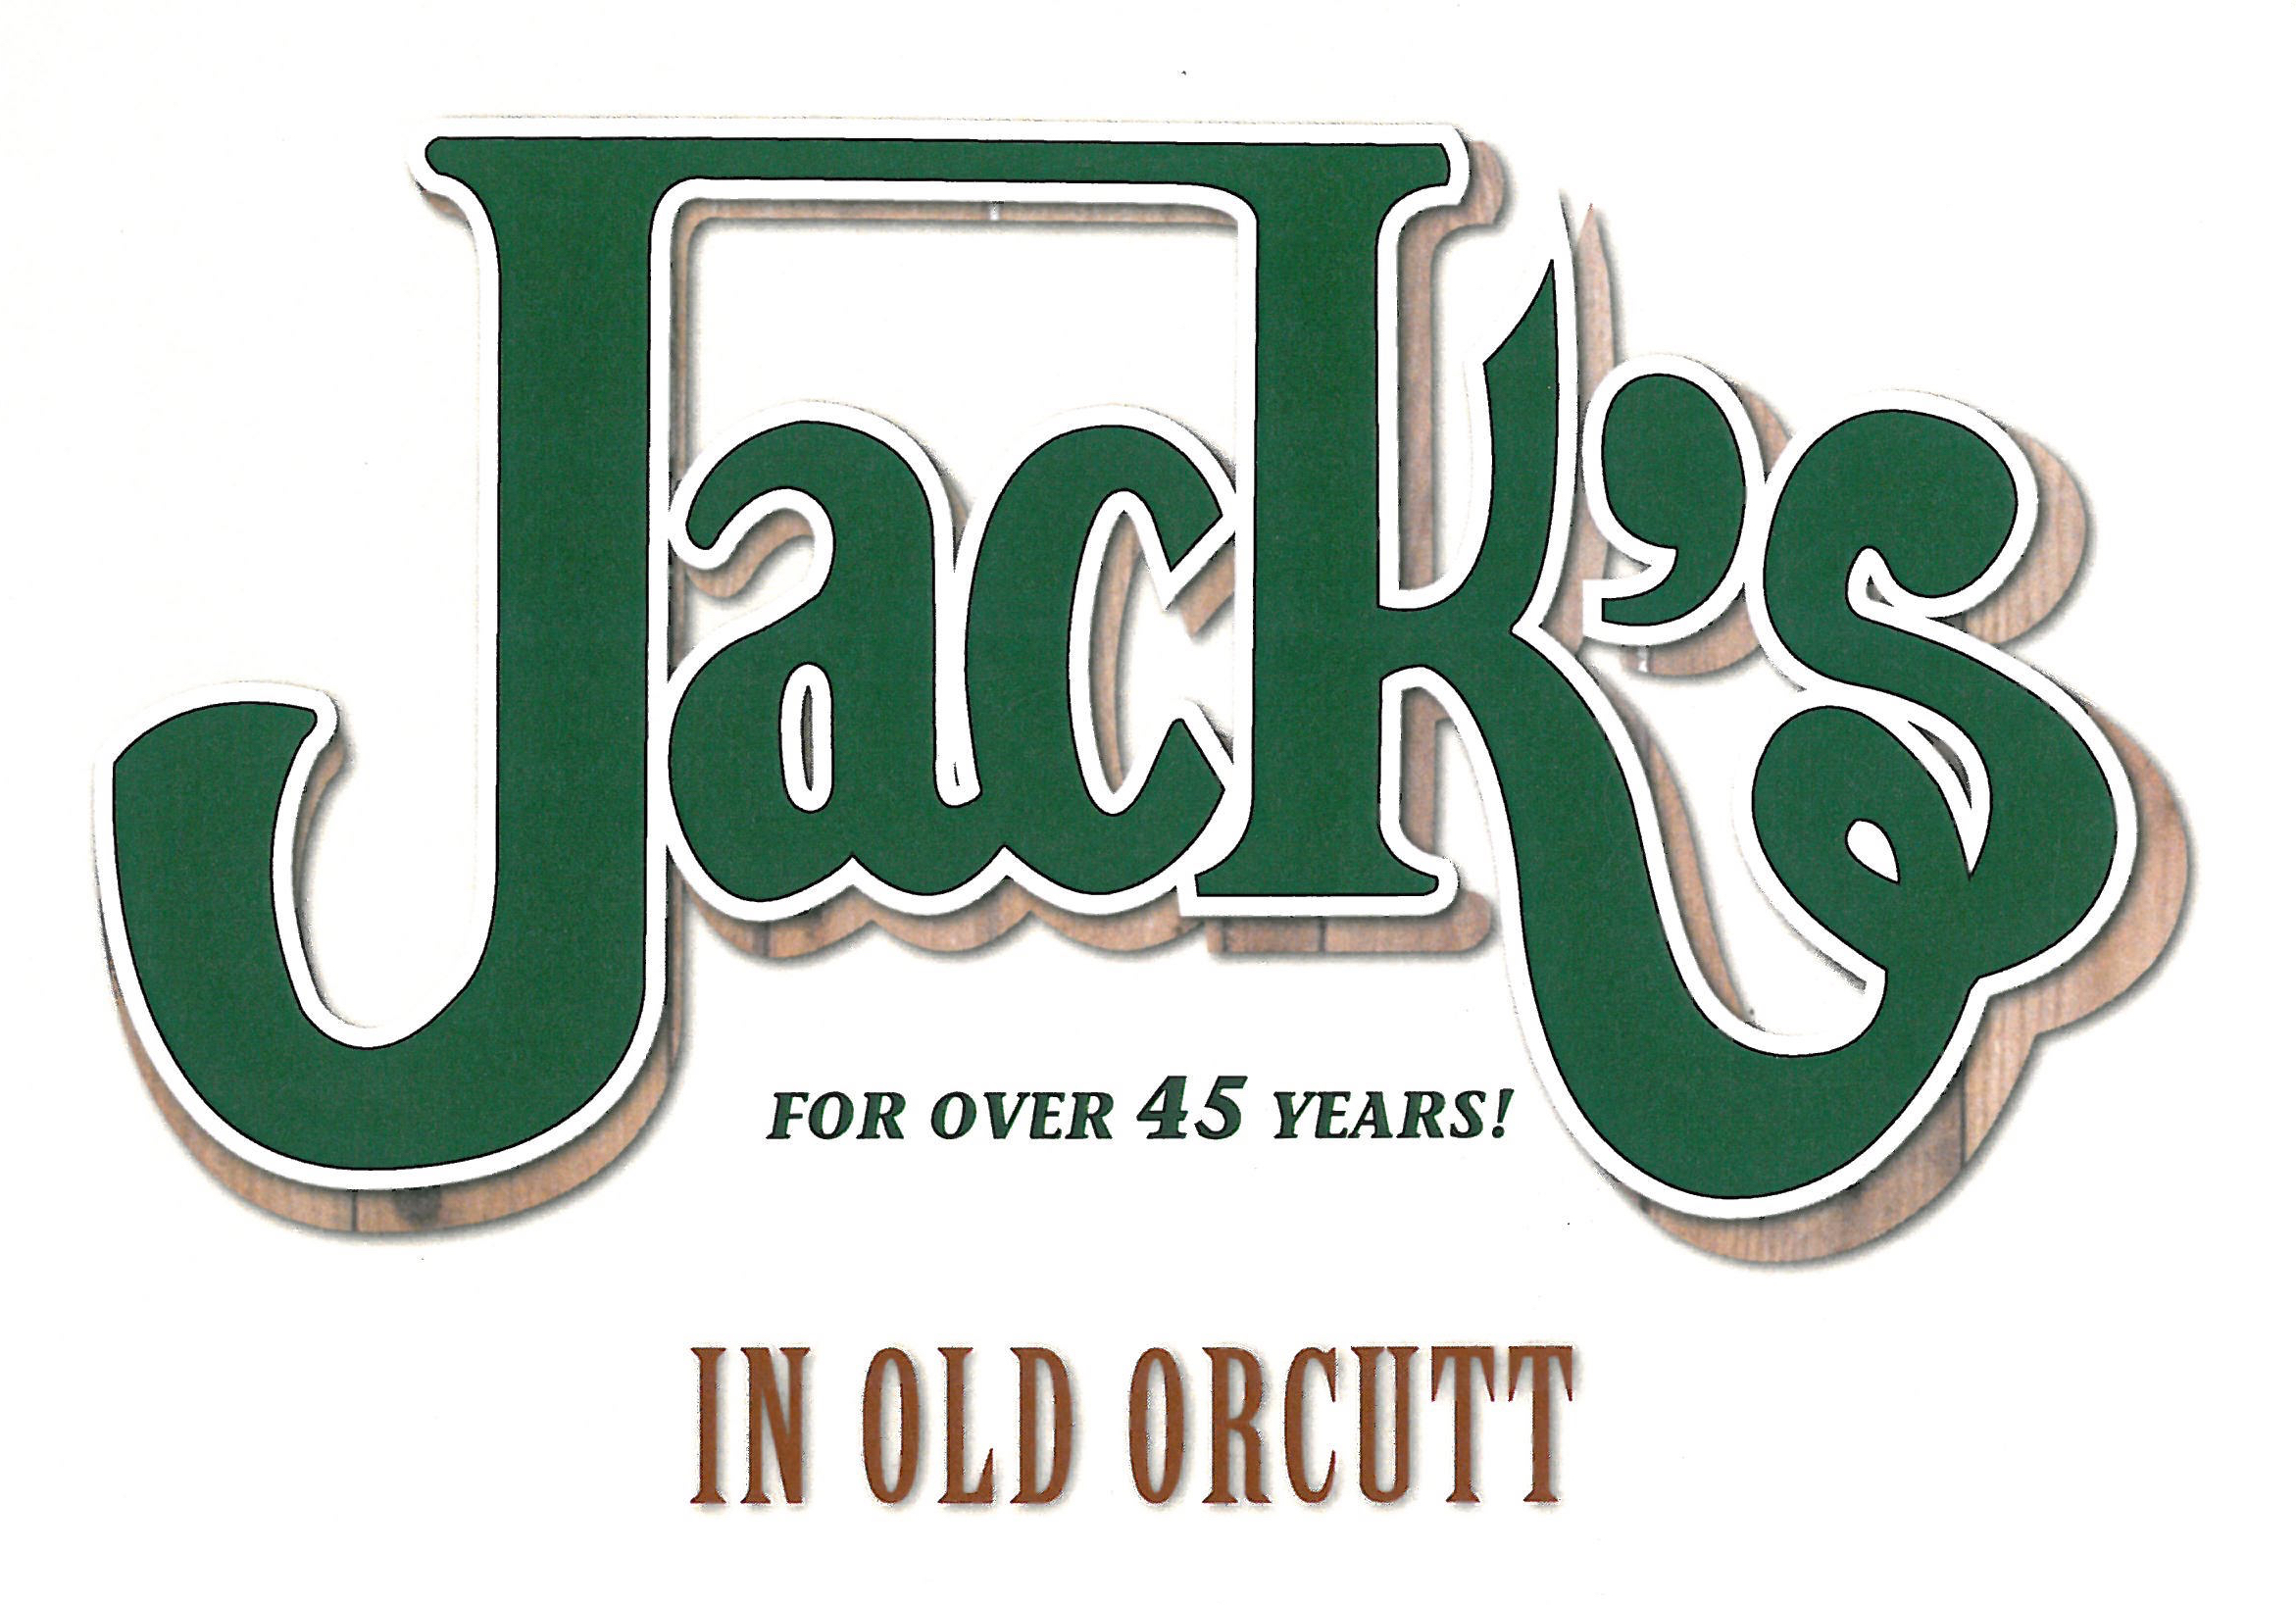 Jacks in Old Orcutt - Homepage